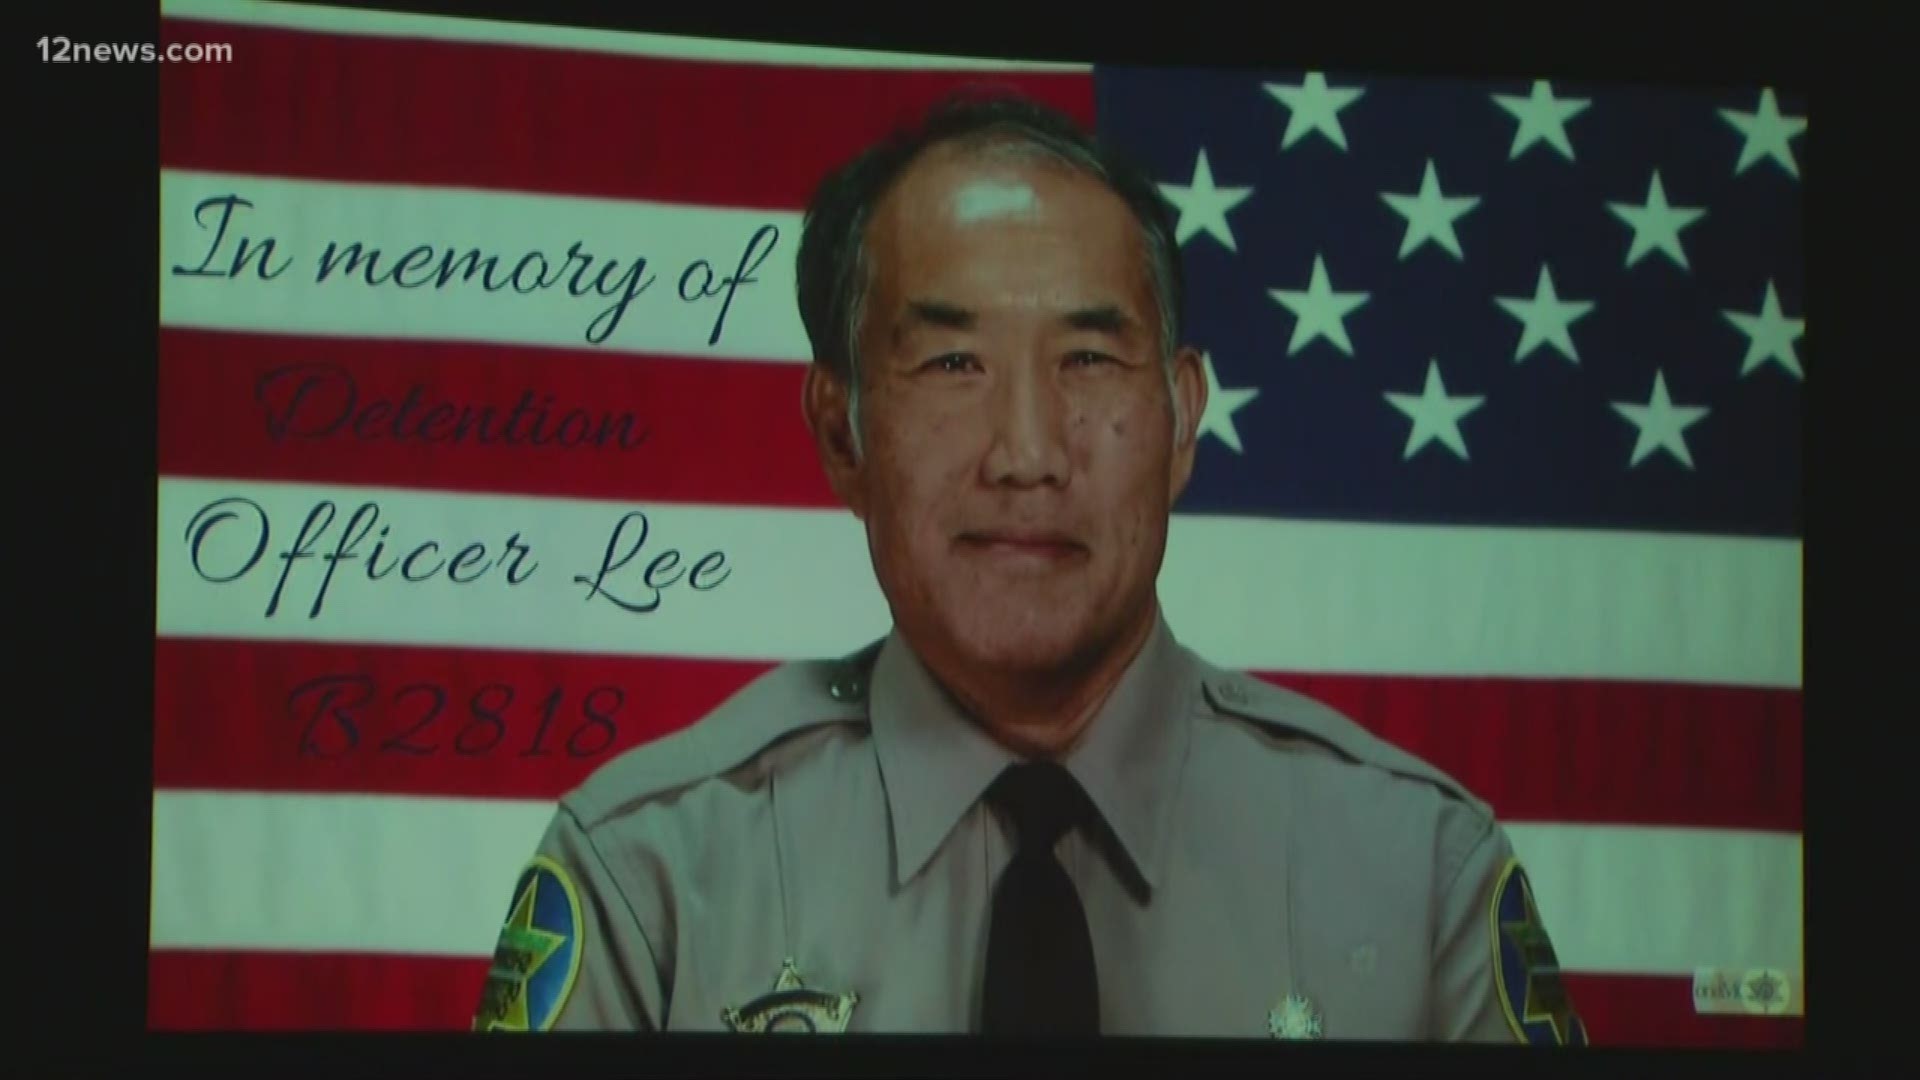 Family, friends and coworkers said goodbye to fallen Detention Officer Jean Lee Friday. Officer Lee was killed when he was attack by an inmate.